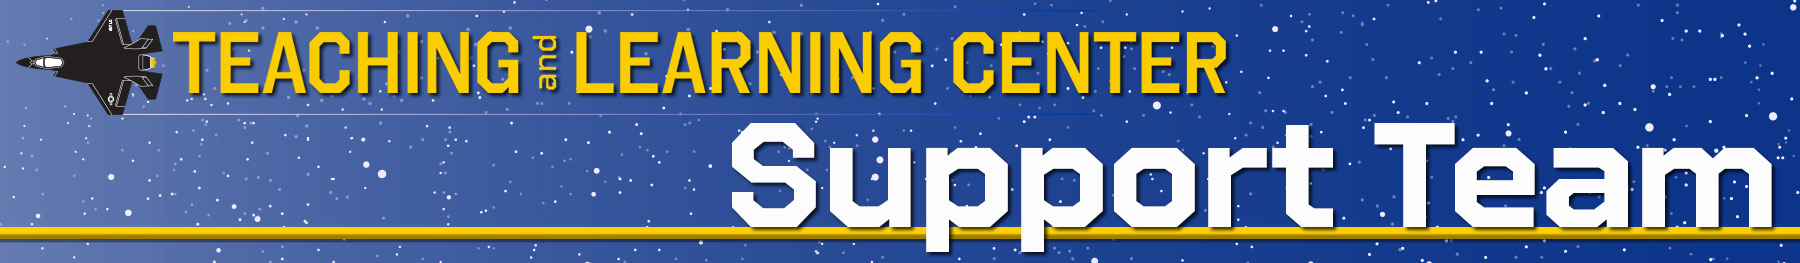 AU Teaching and Learning Center Support Team Banner